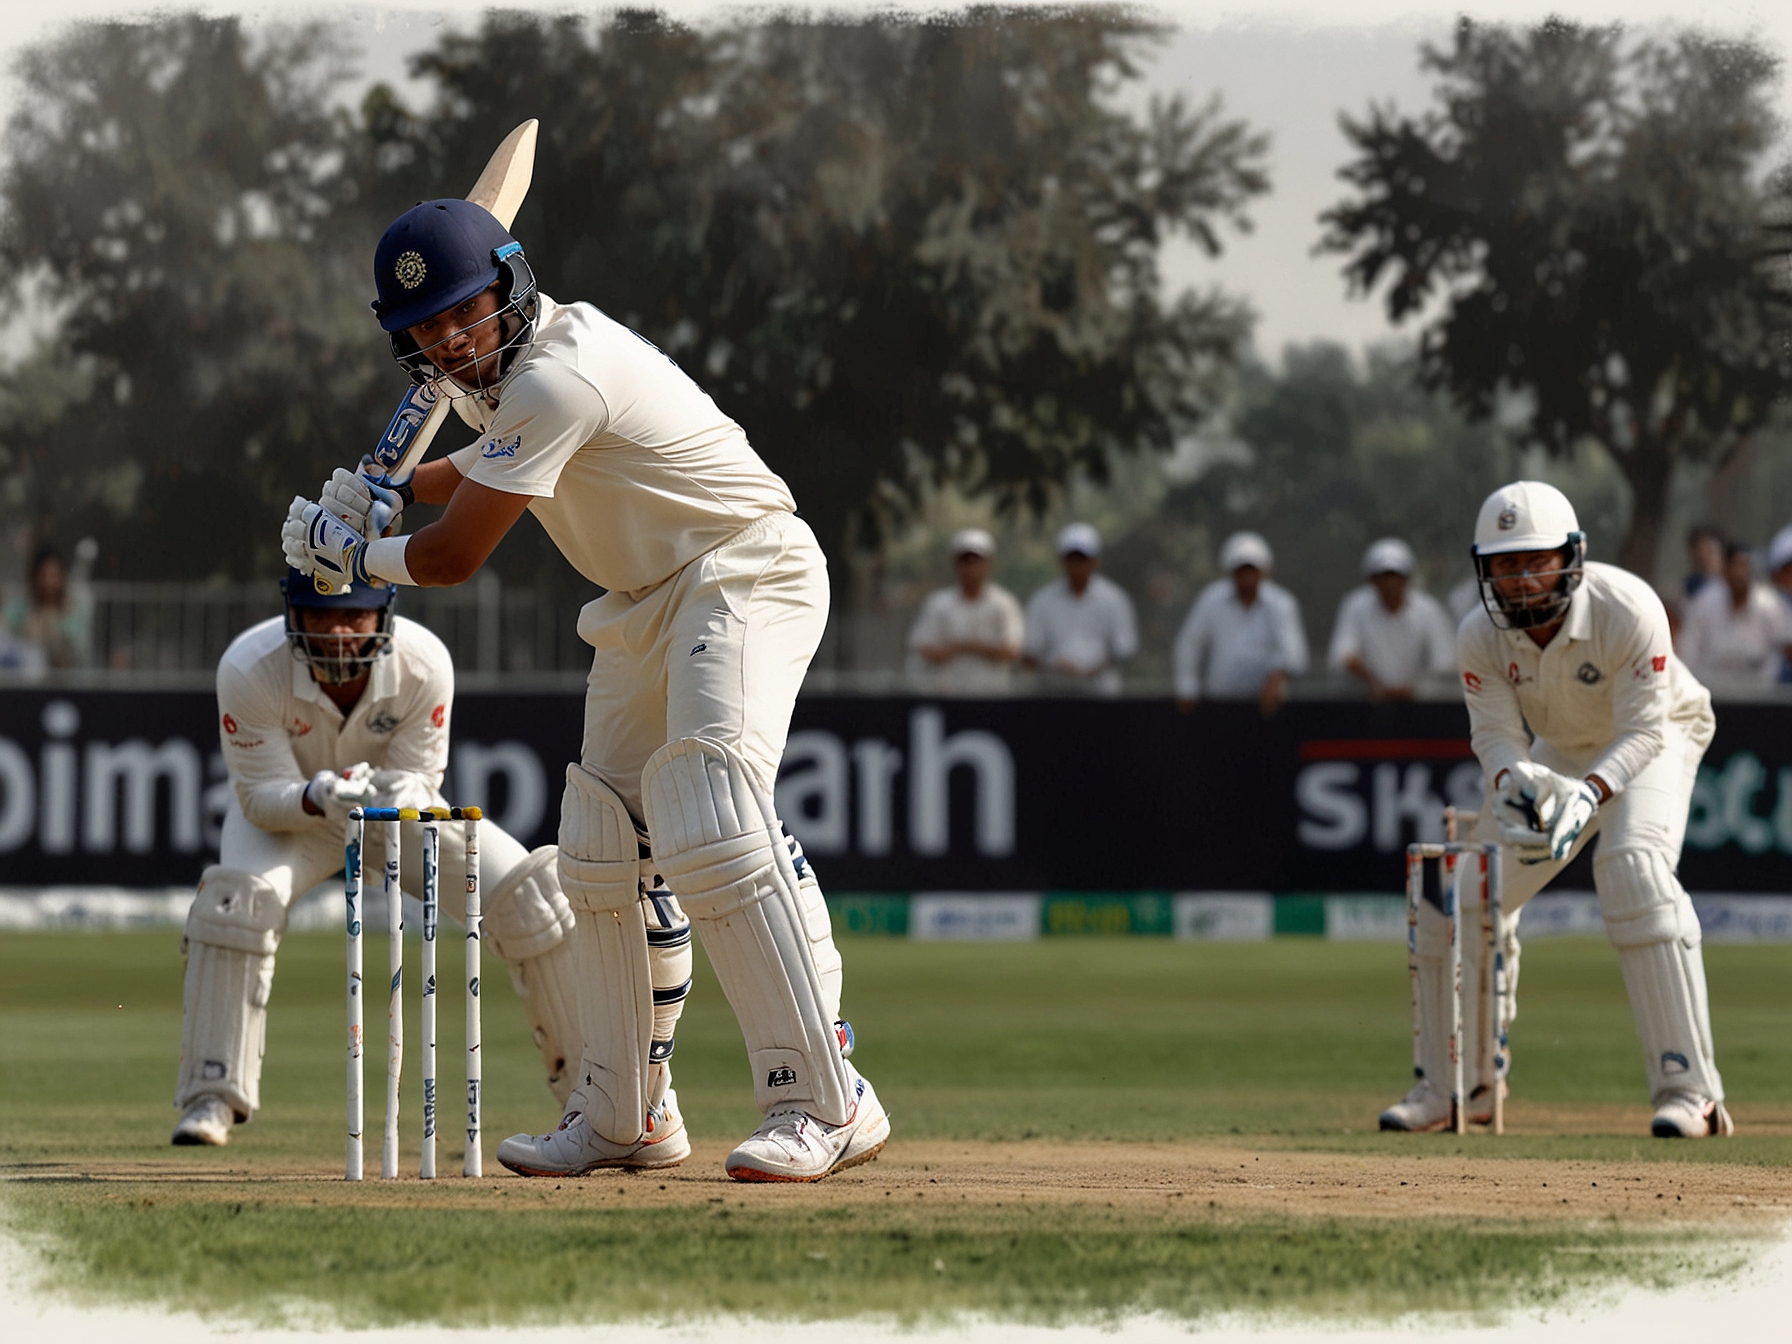 Sahil Chauhan batting on the field, sending a powerful shot towards the boundary in his record-breaking 27-ball century innings. The crowd and teammates are visibly ecstatic.